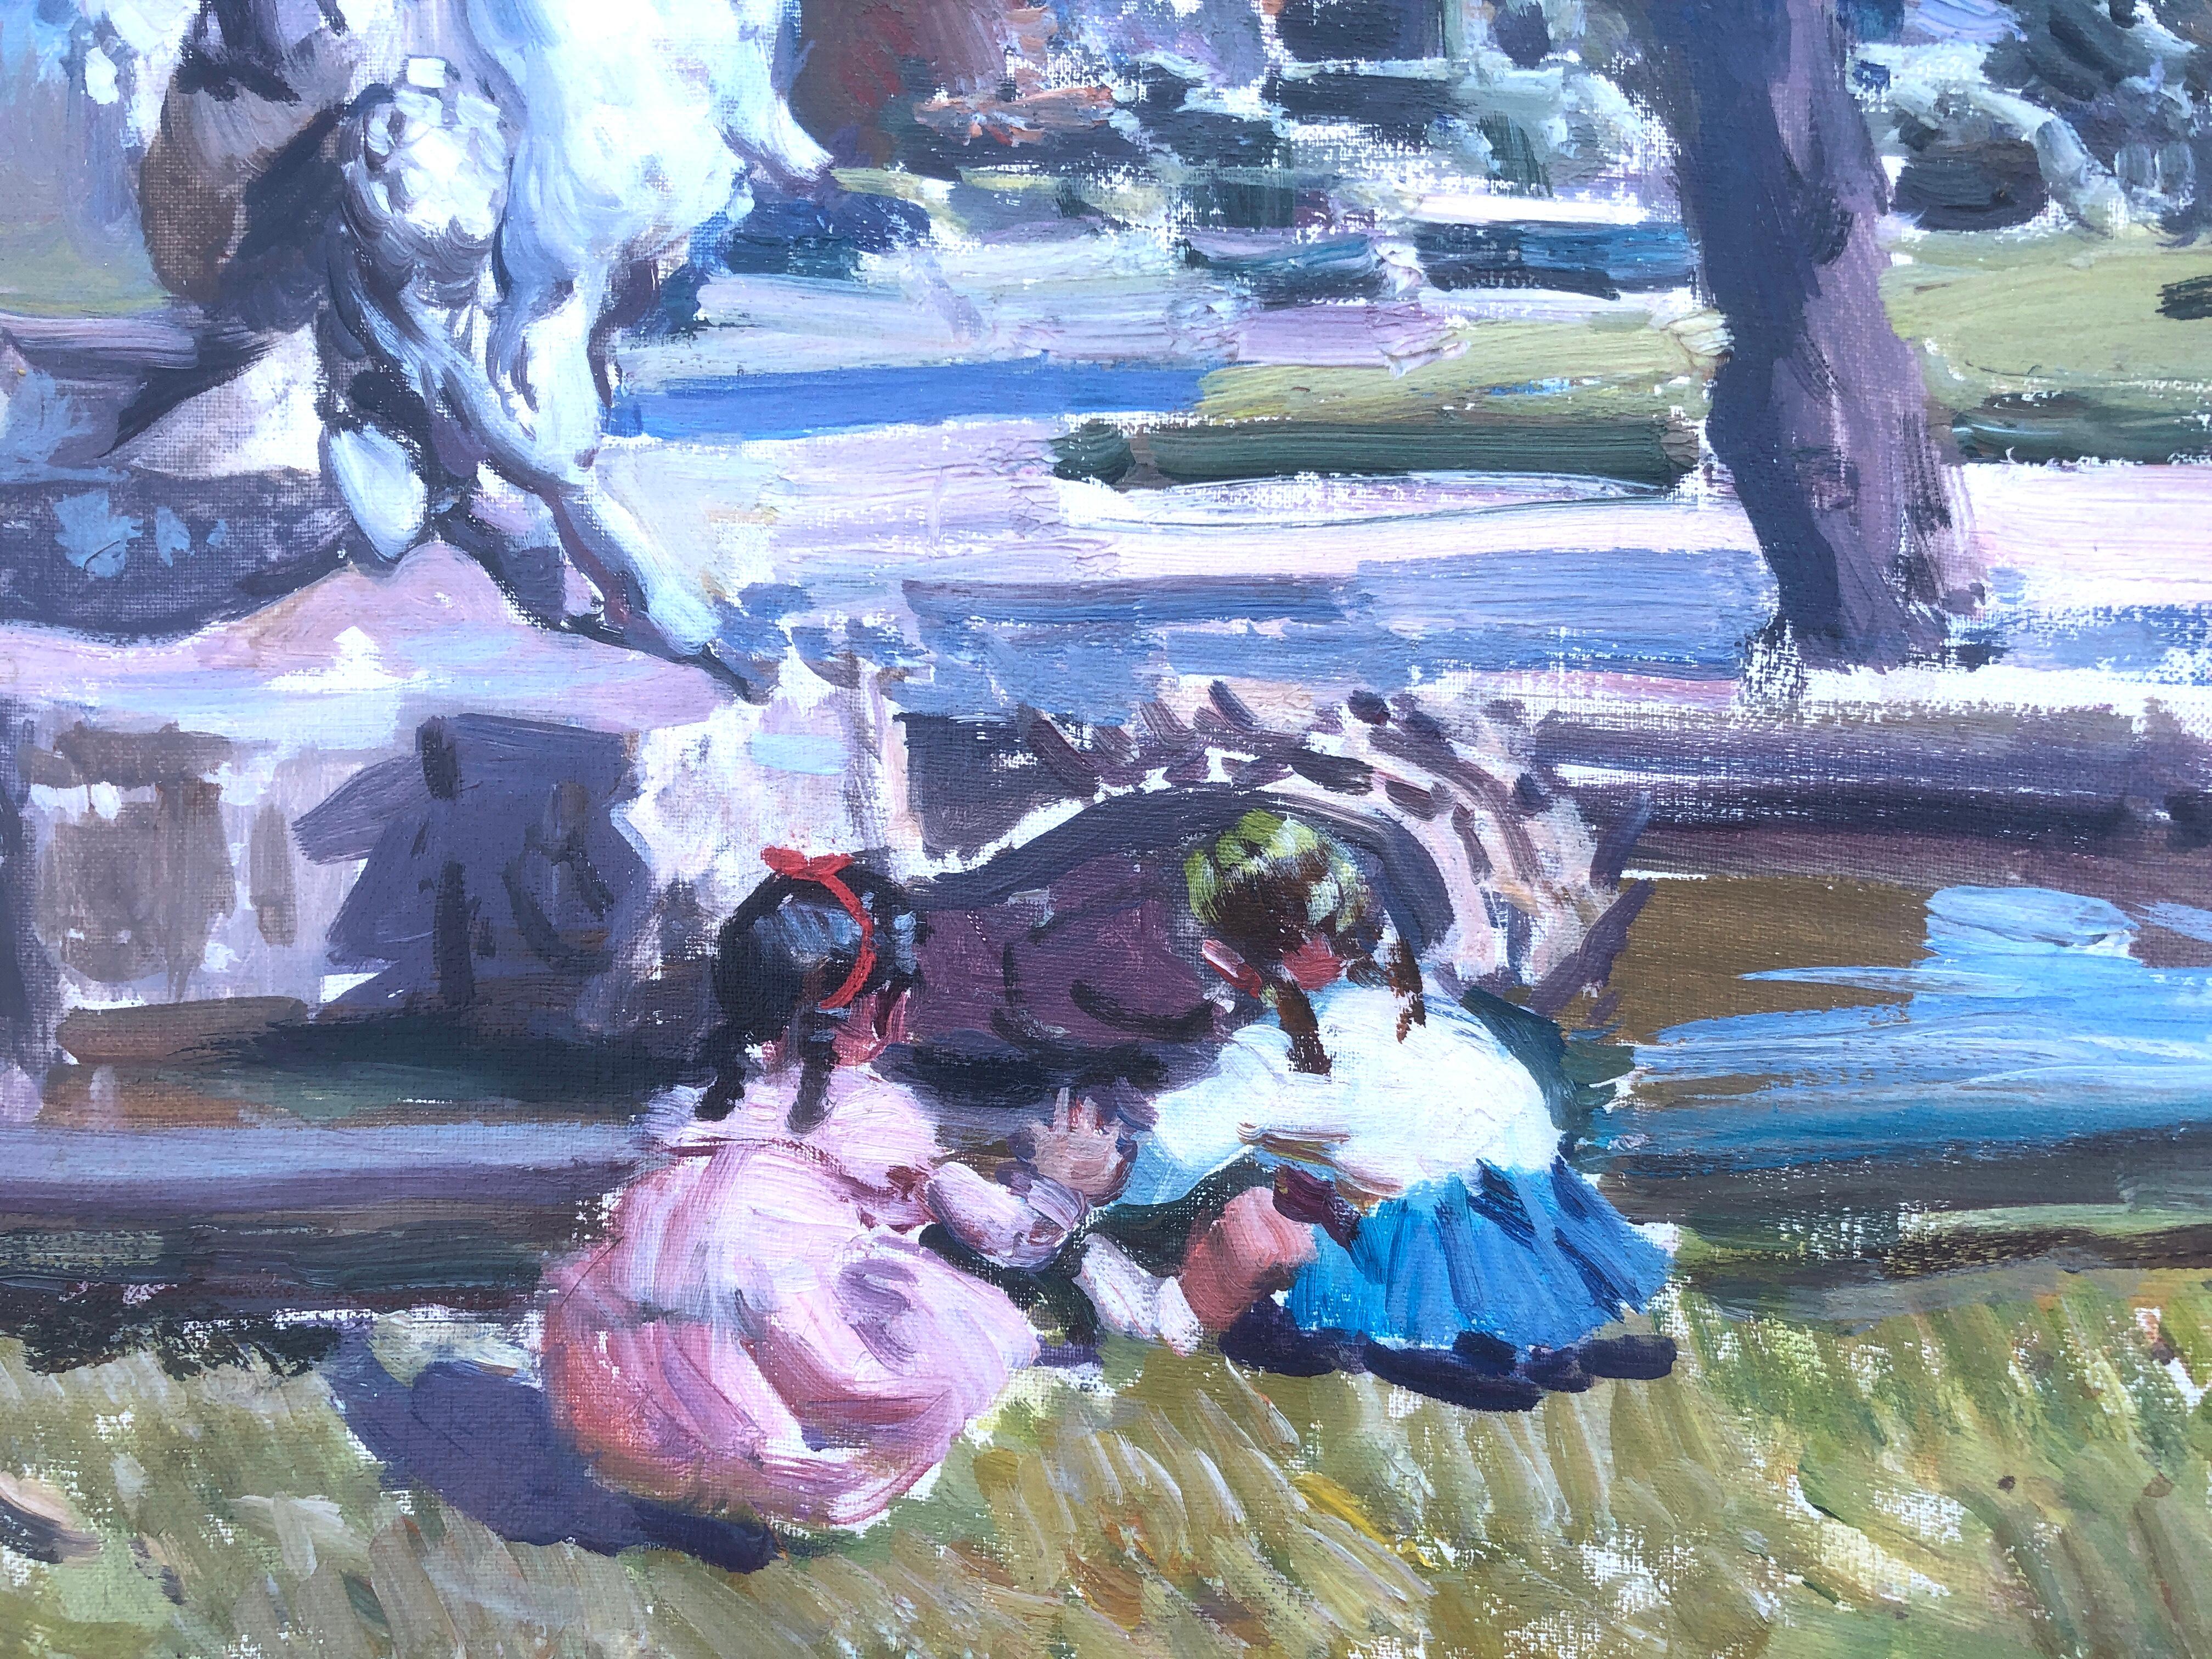 Children playing in the park Barcelona Spain oil on canvas painting - Post-Impressionist Painting by Ignacio Gil Sala